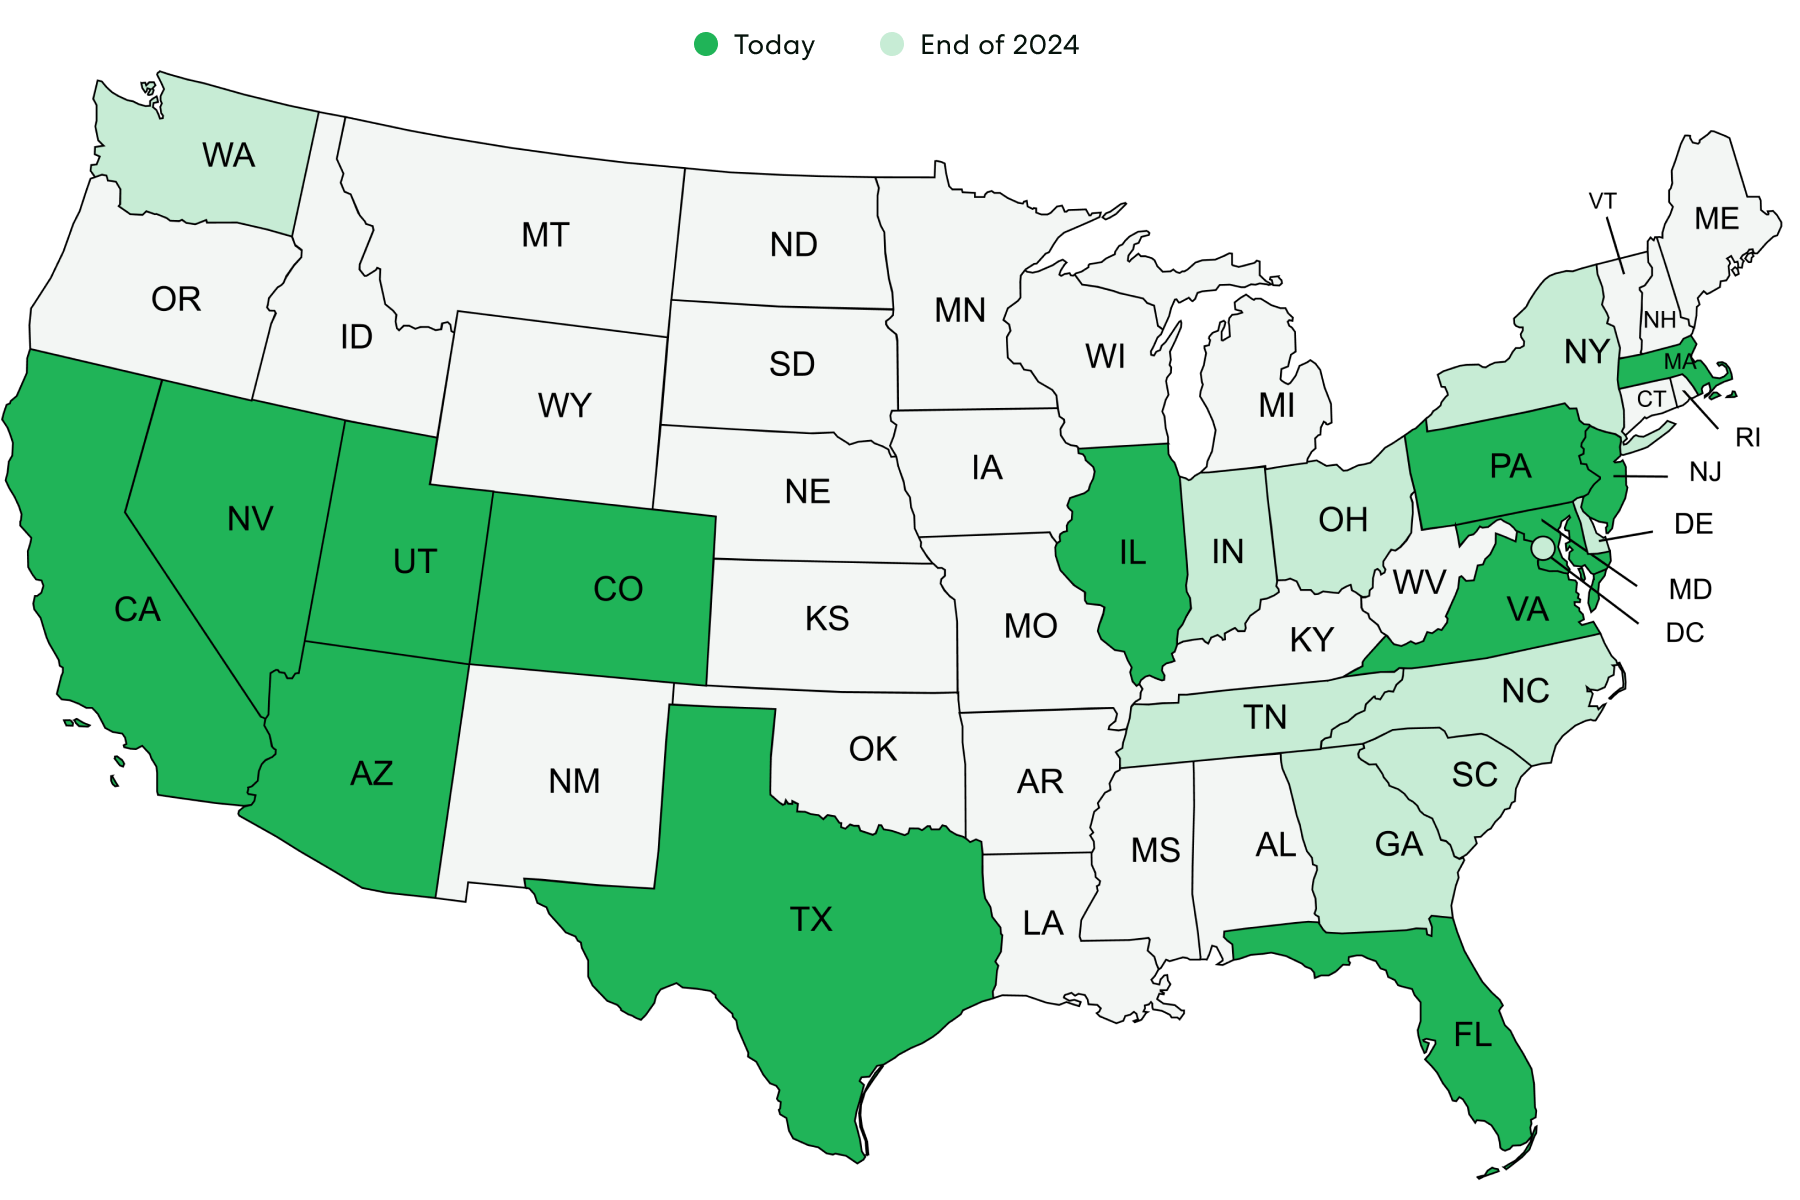 Map of states operates - 15 total